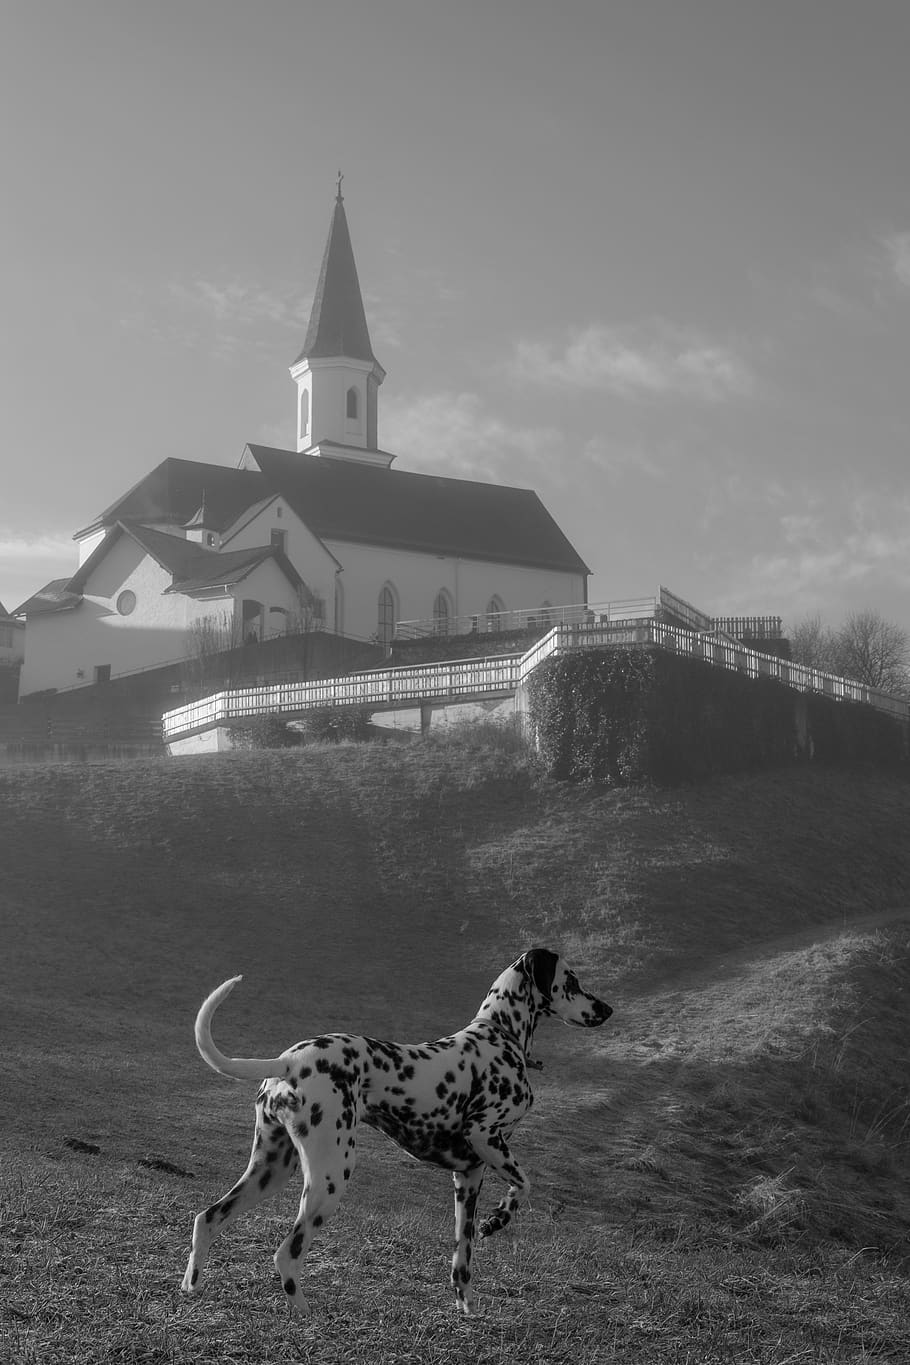 church, dog, dalmatians, black and white, built structure, architecture, building exterior, animal, animal themes, sky